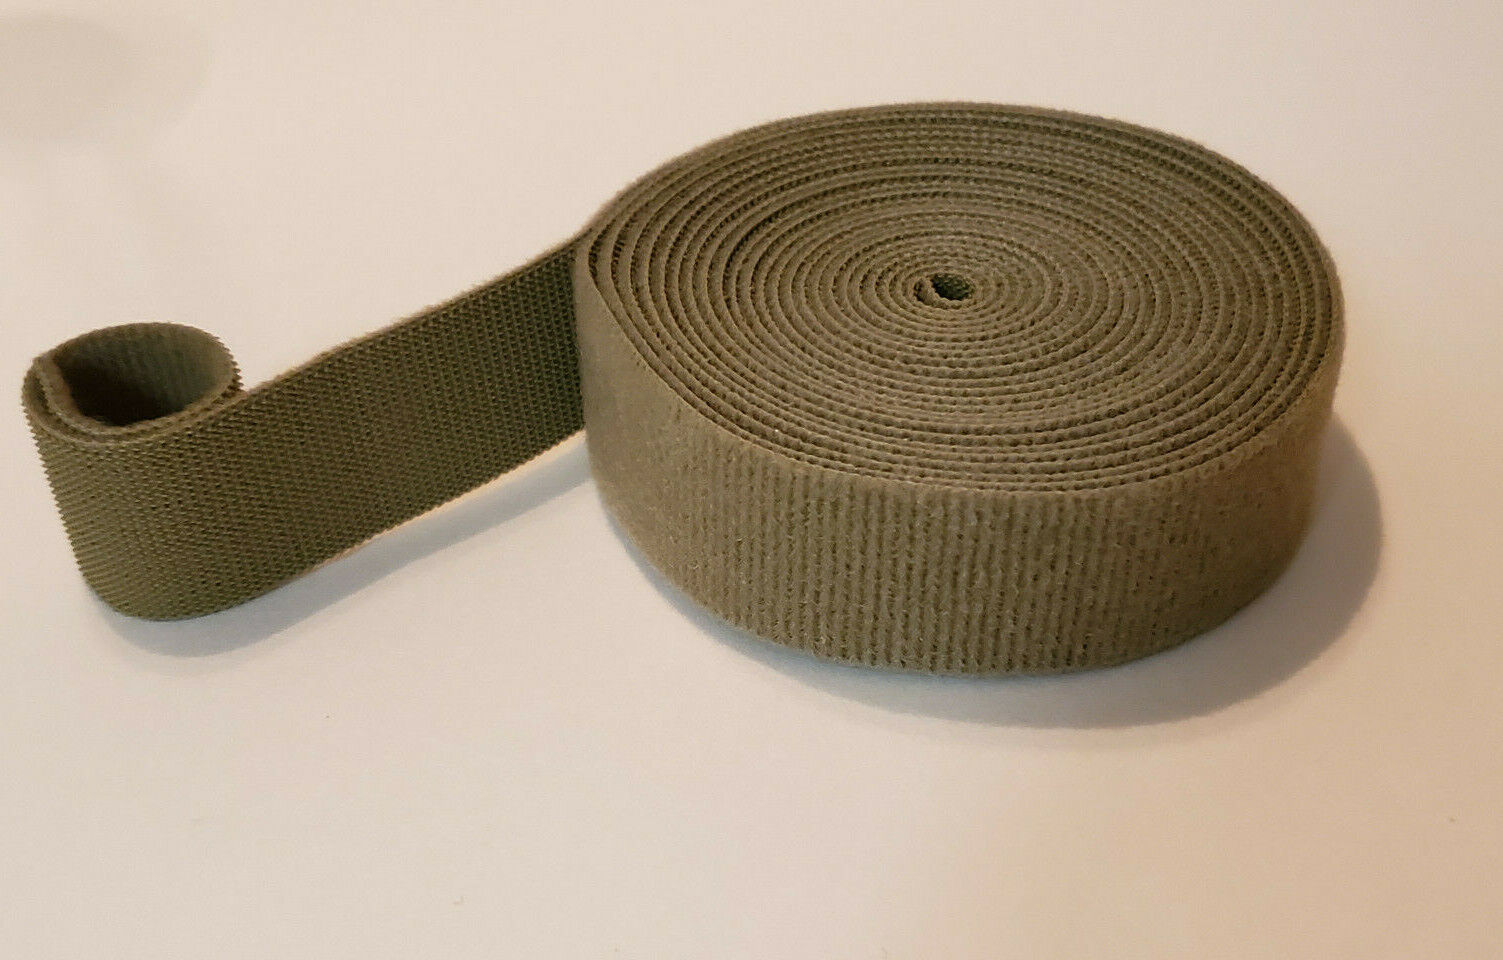 VELCRO® Brand ONE-WRAP® Dbl Sided Hook & Loop Tape 1 X 12ft Military Tan